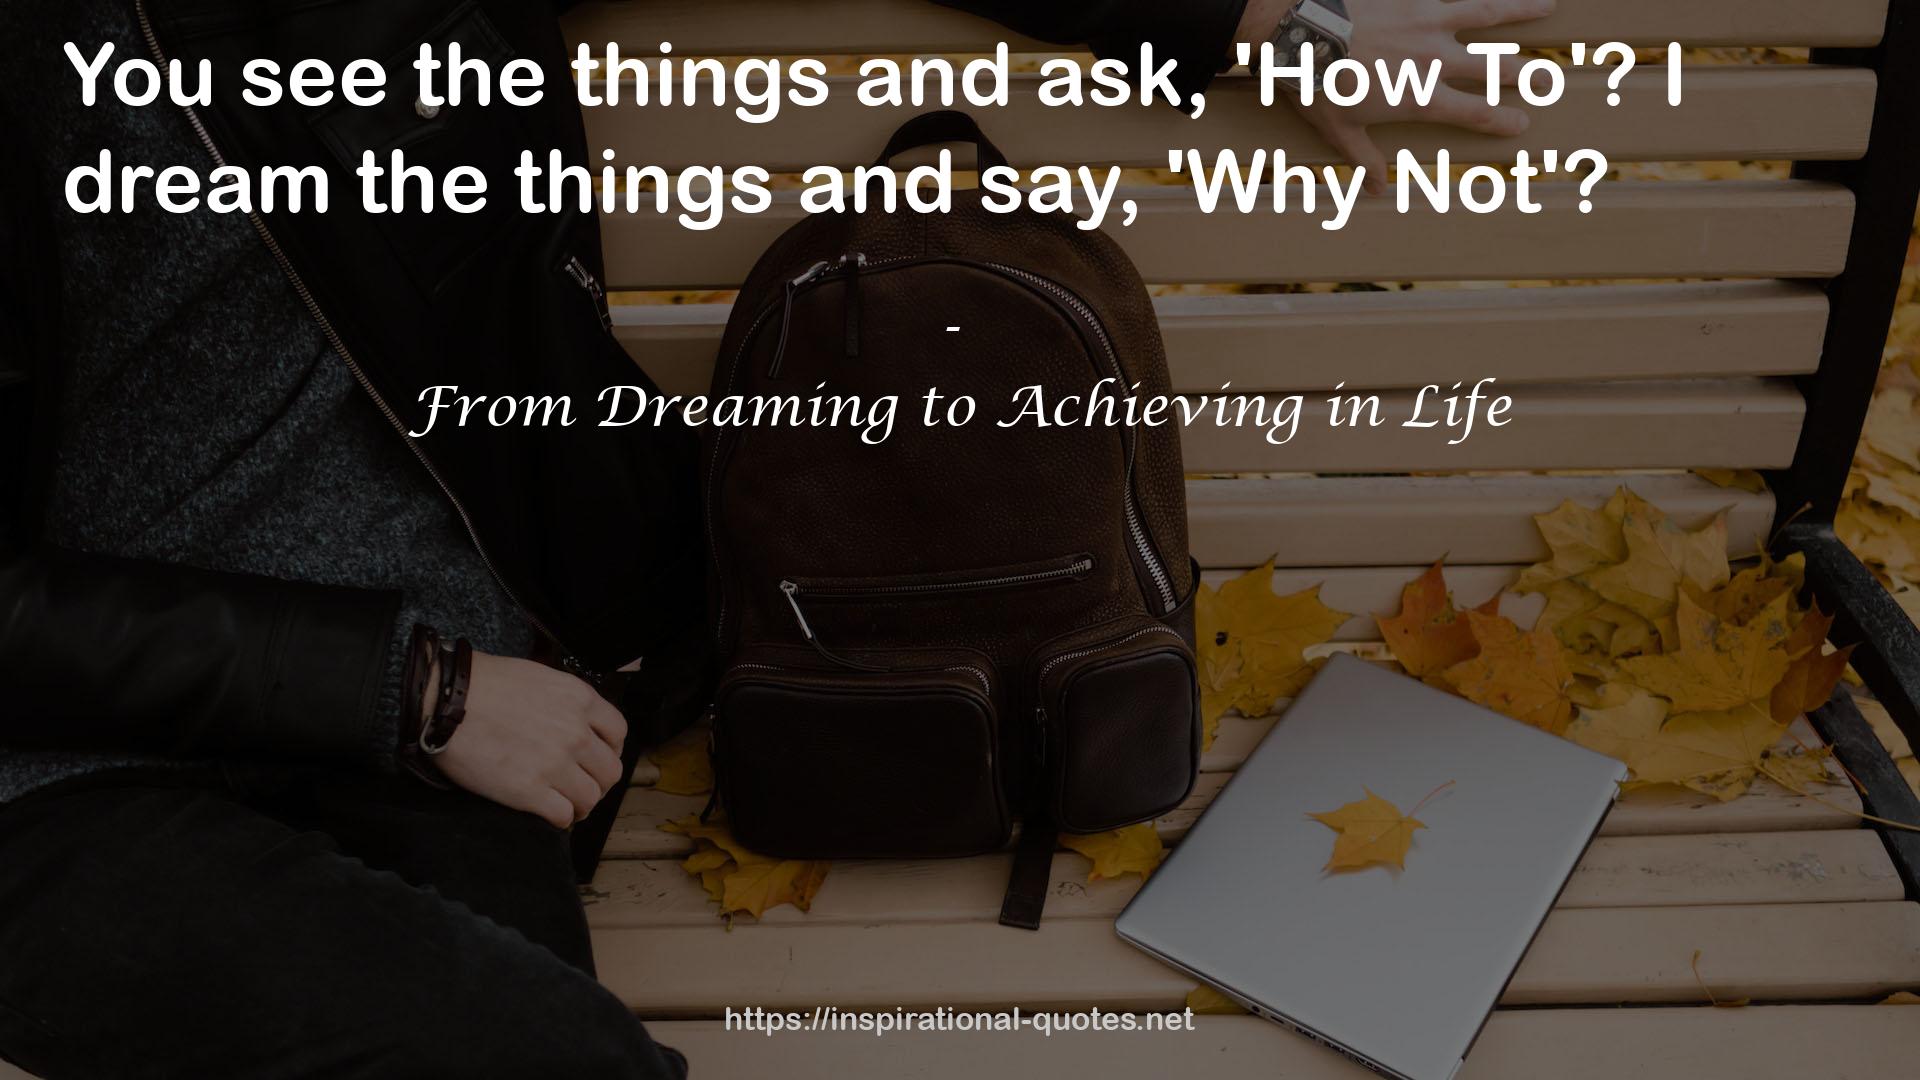 From Dreaming to Achieving in Life QUOTES